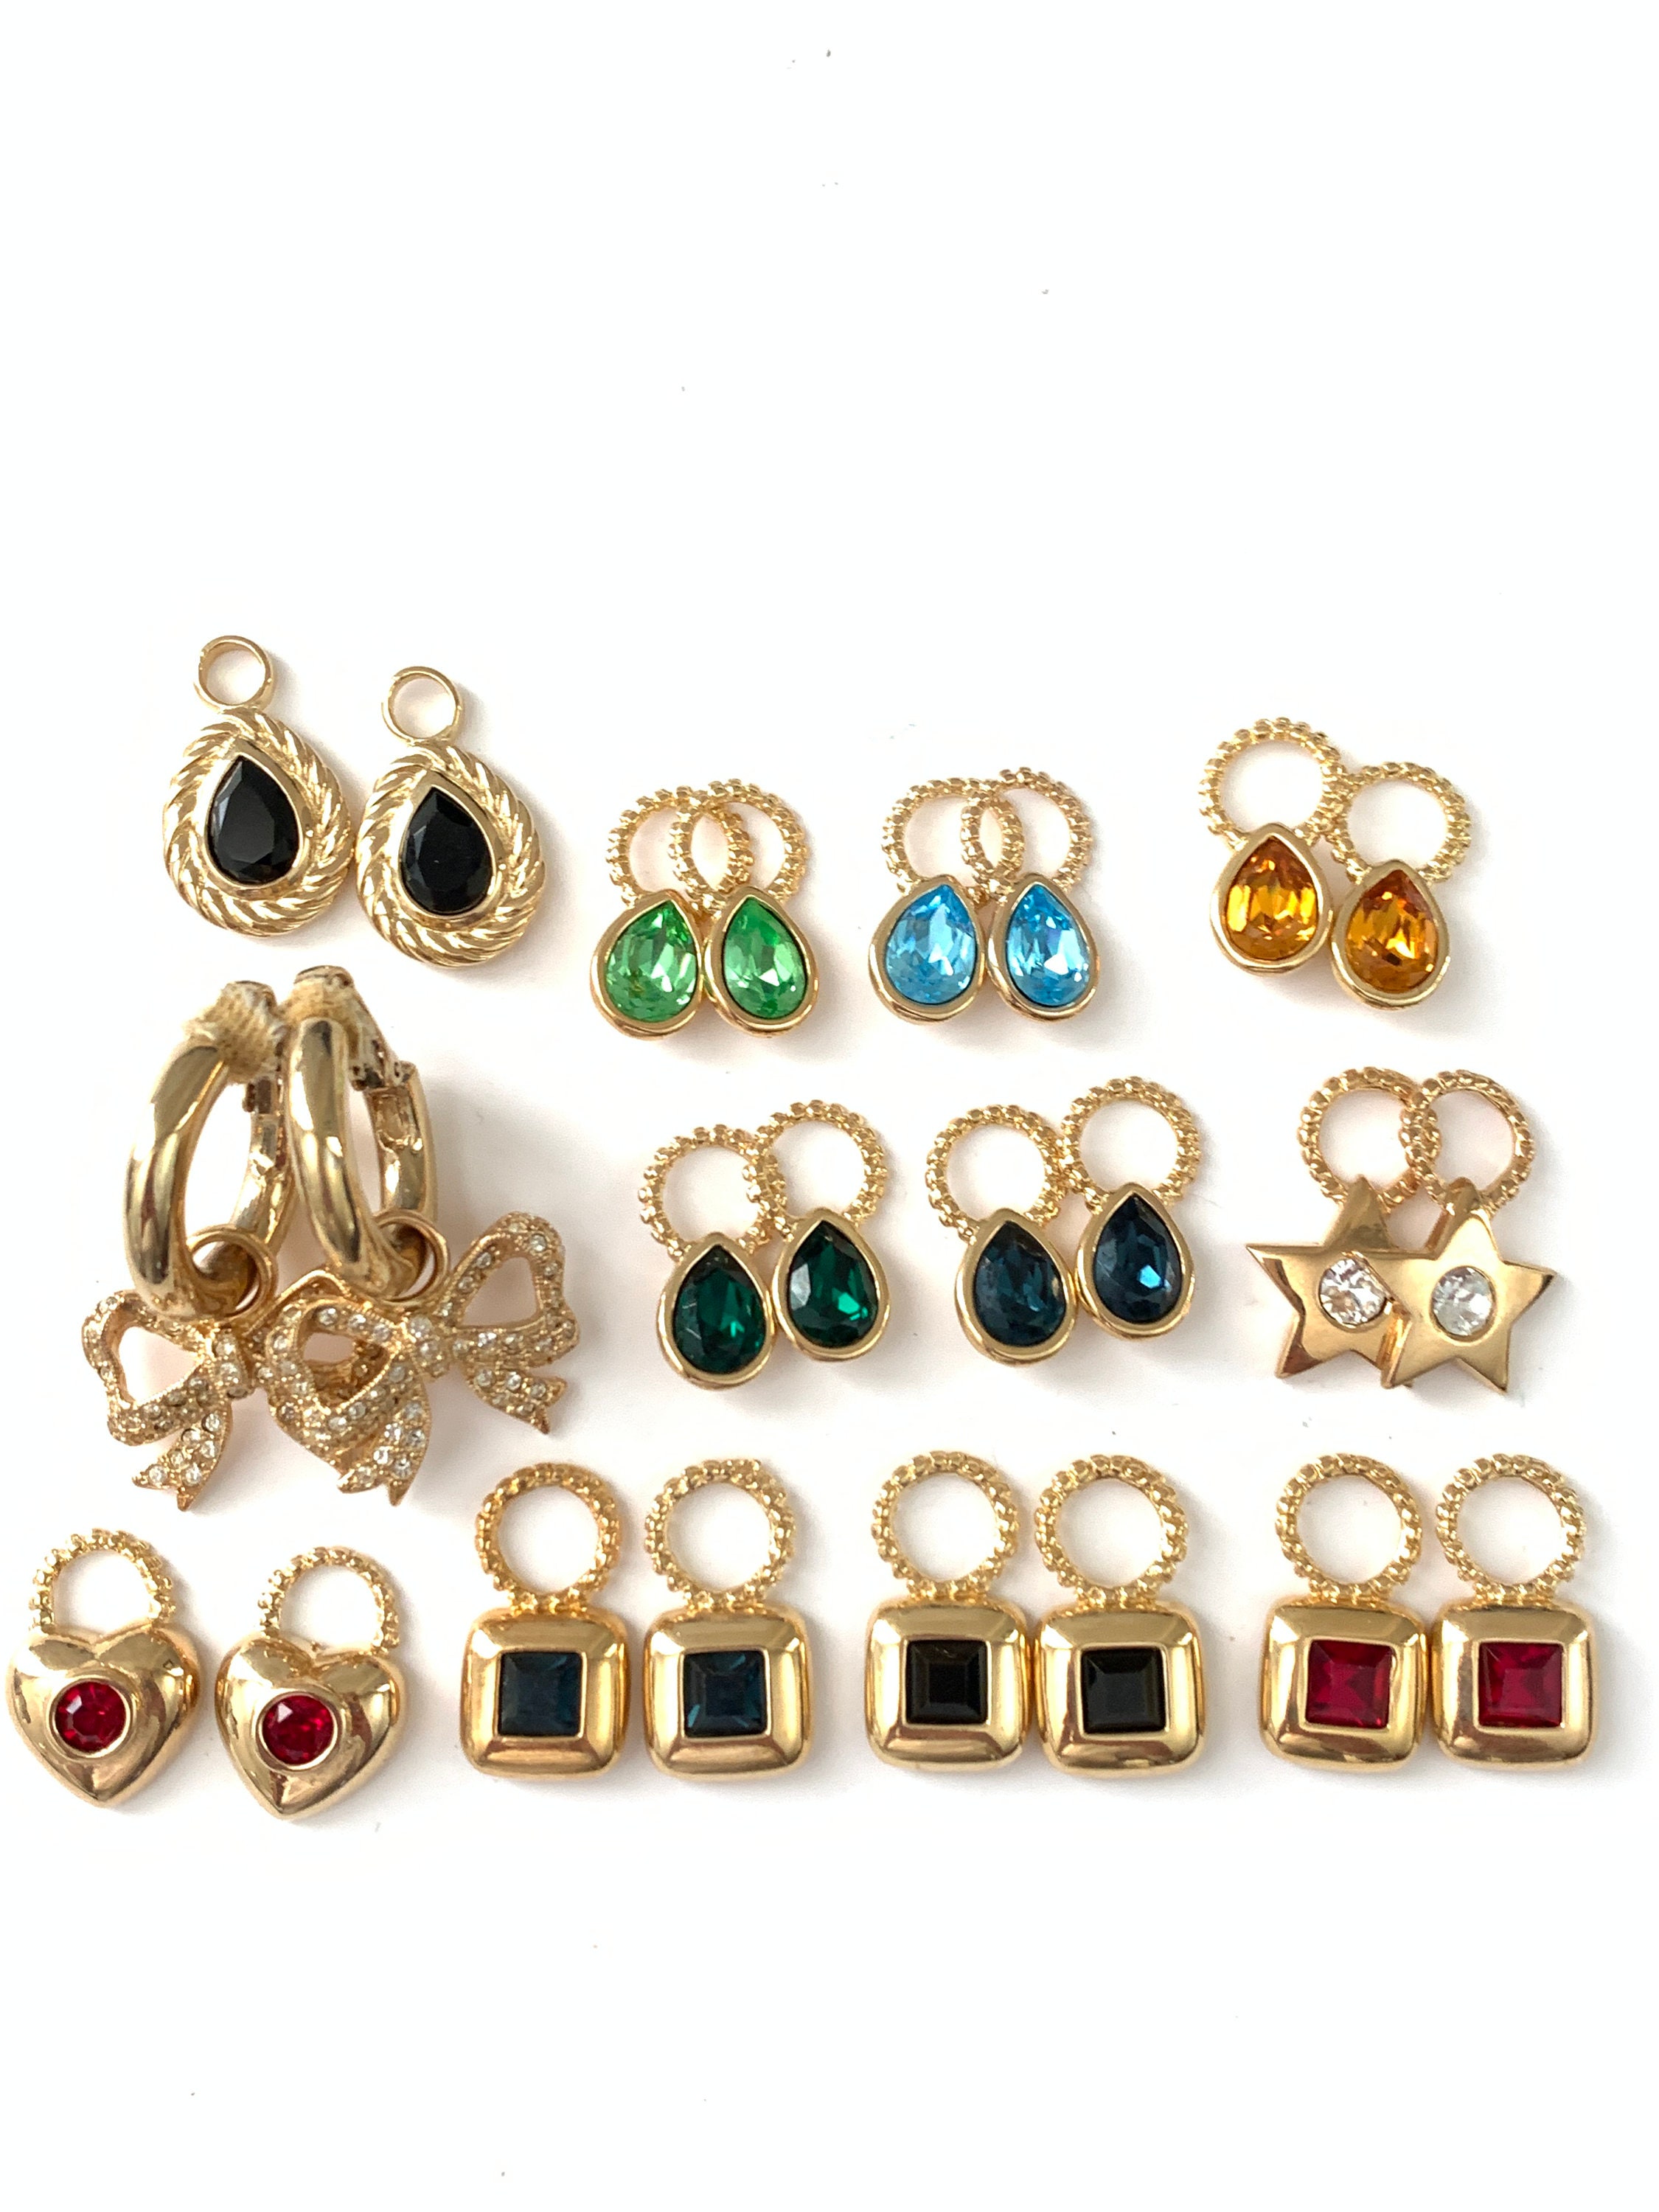 Studs earrings review: Are these 90s-themed earrings worth it? - Reviewed